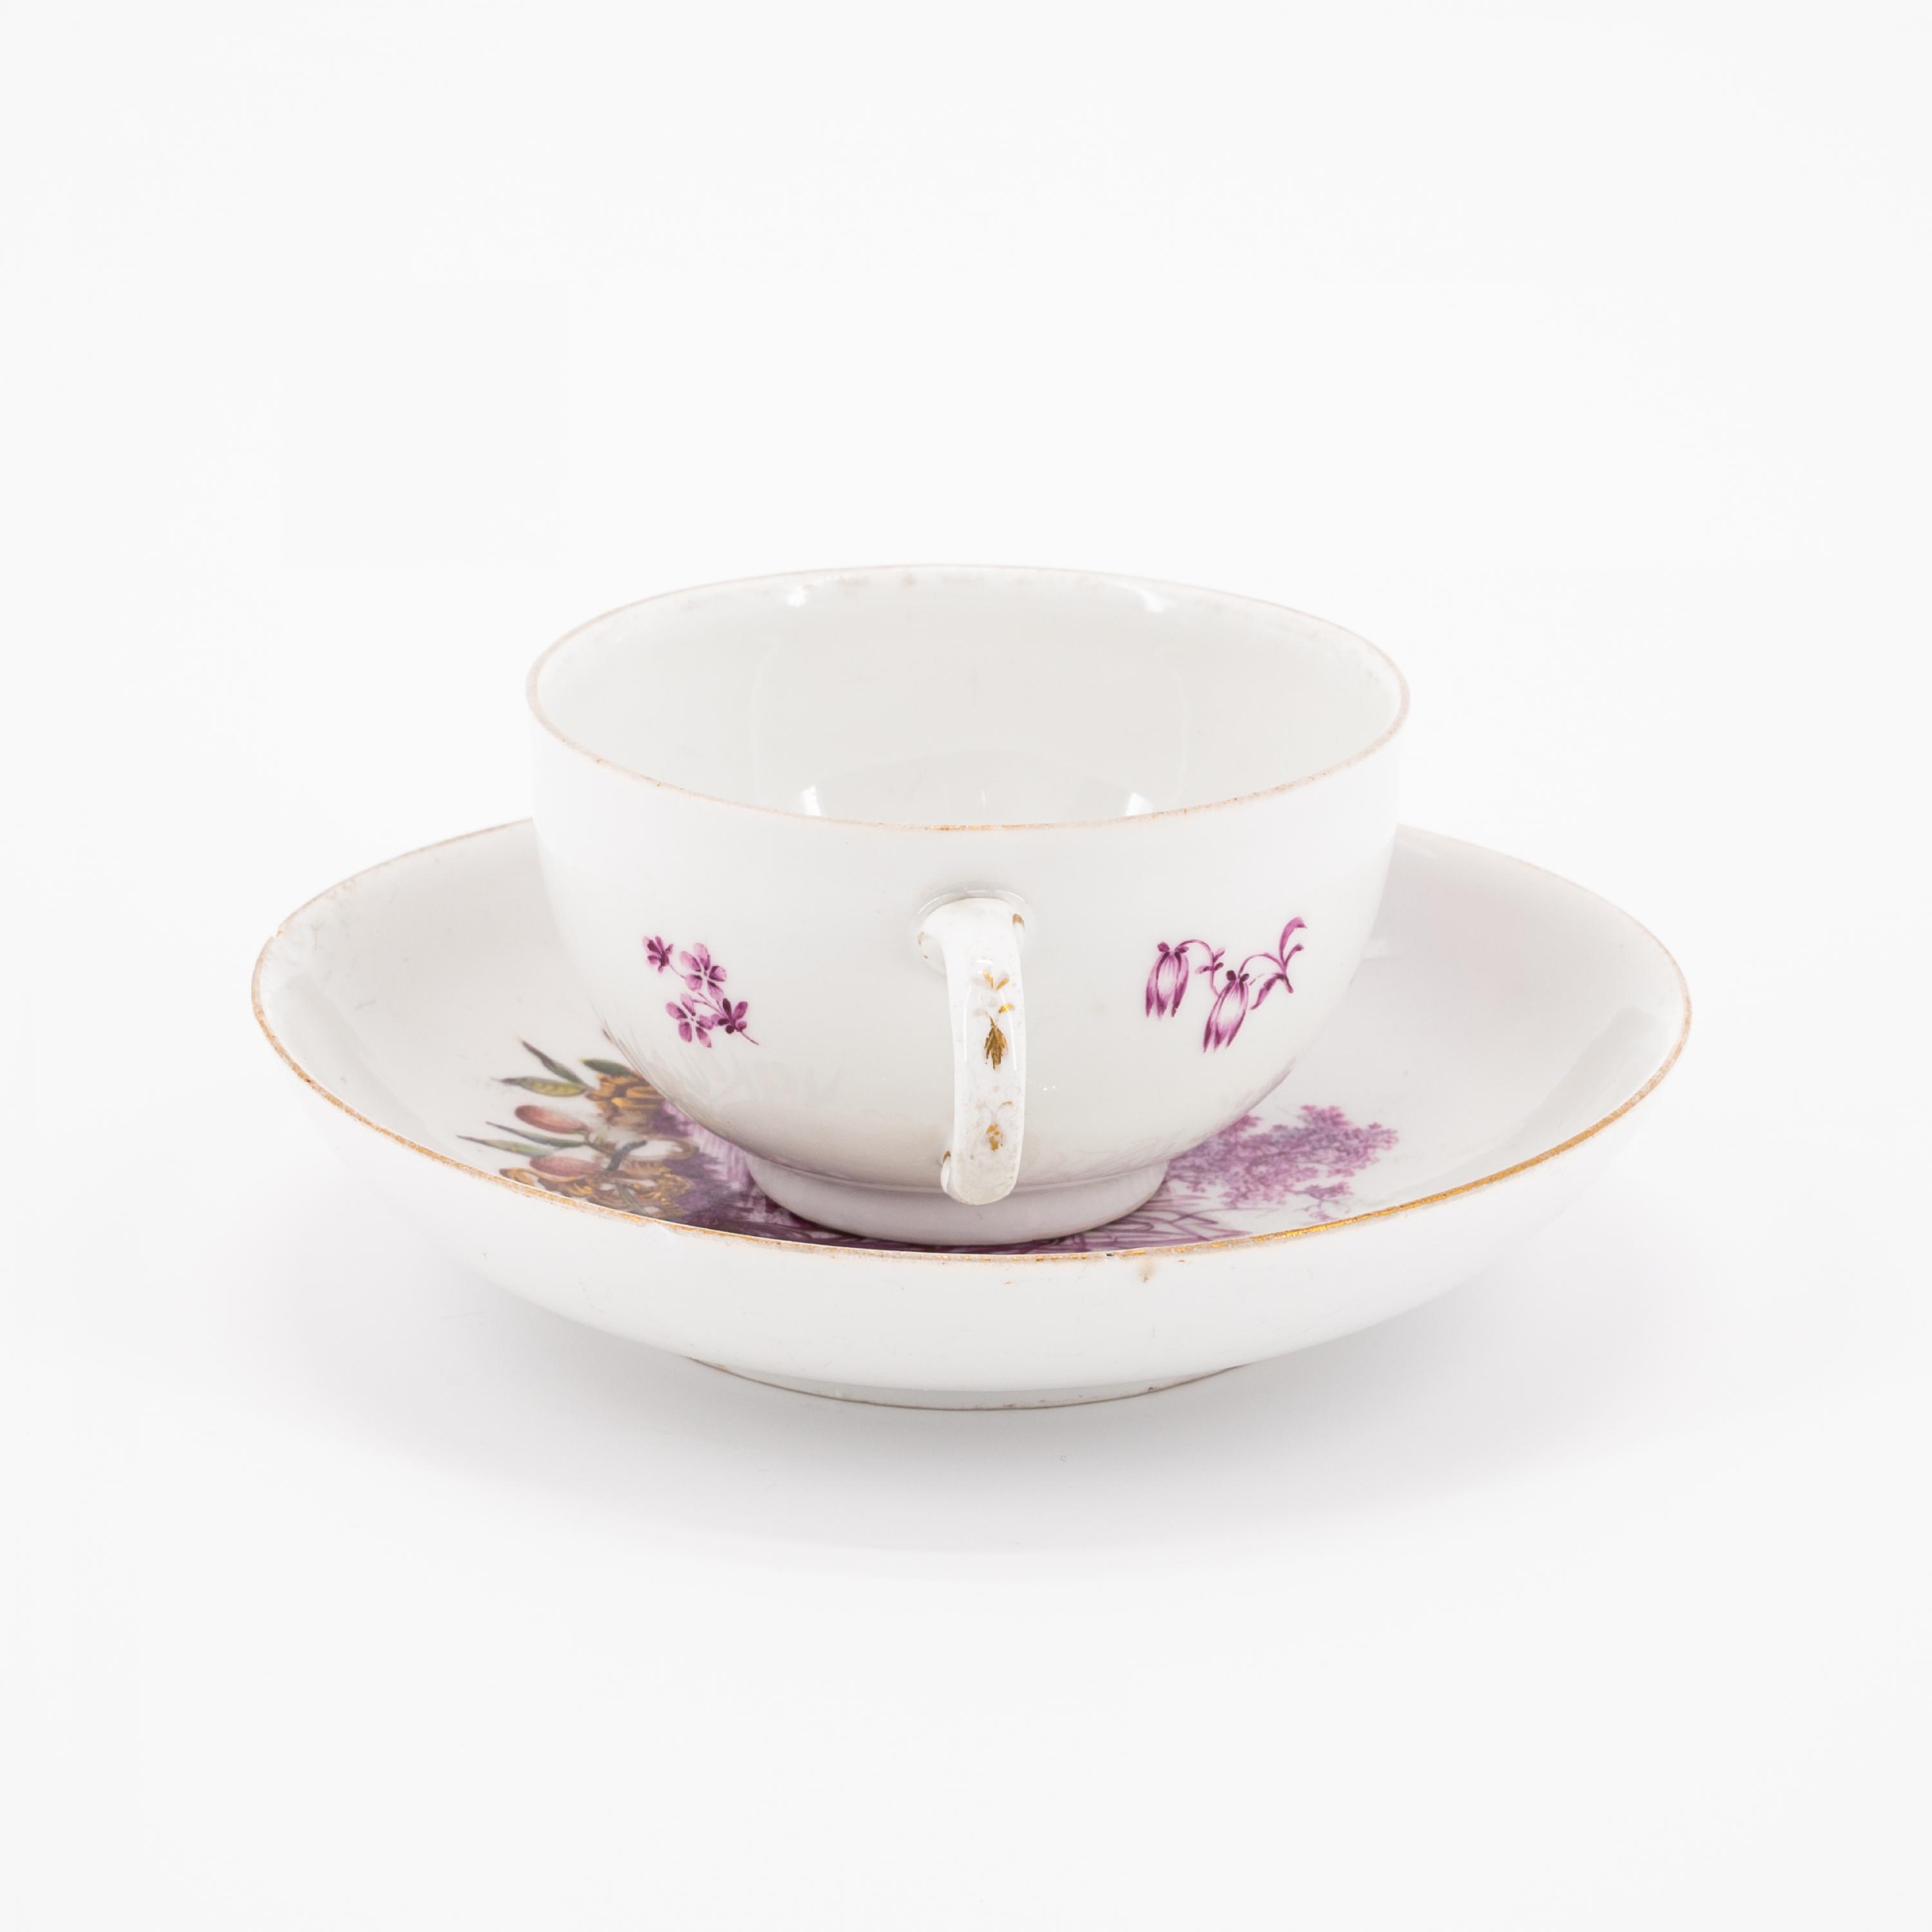 PORCELAIN CUP AND SAUCER WITH HUNTING SCENES IN PURPLE CAMAIEU - Image 2 of 6